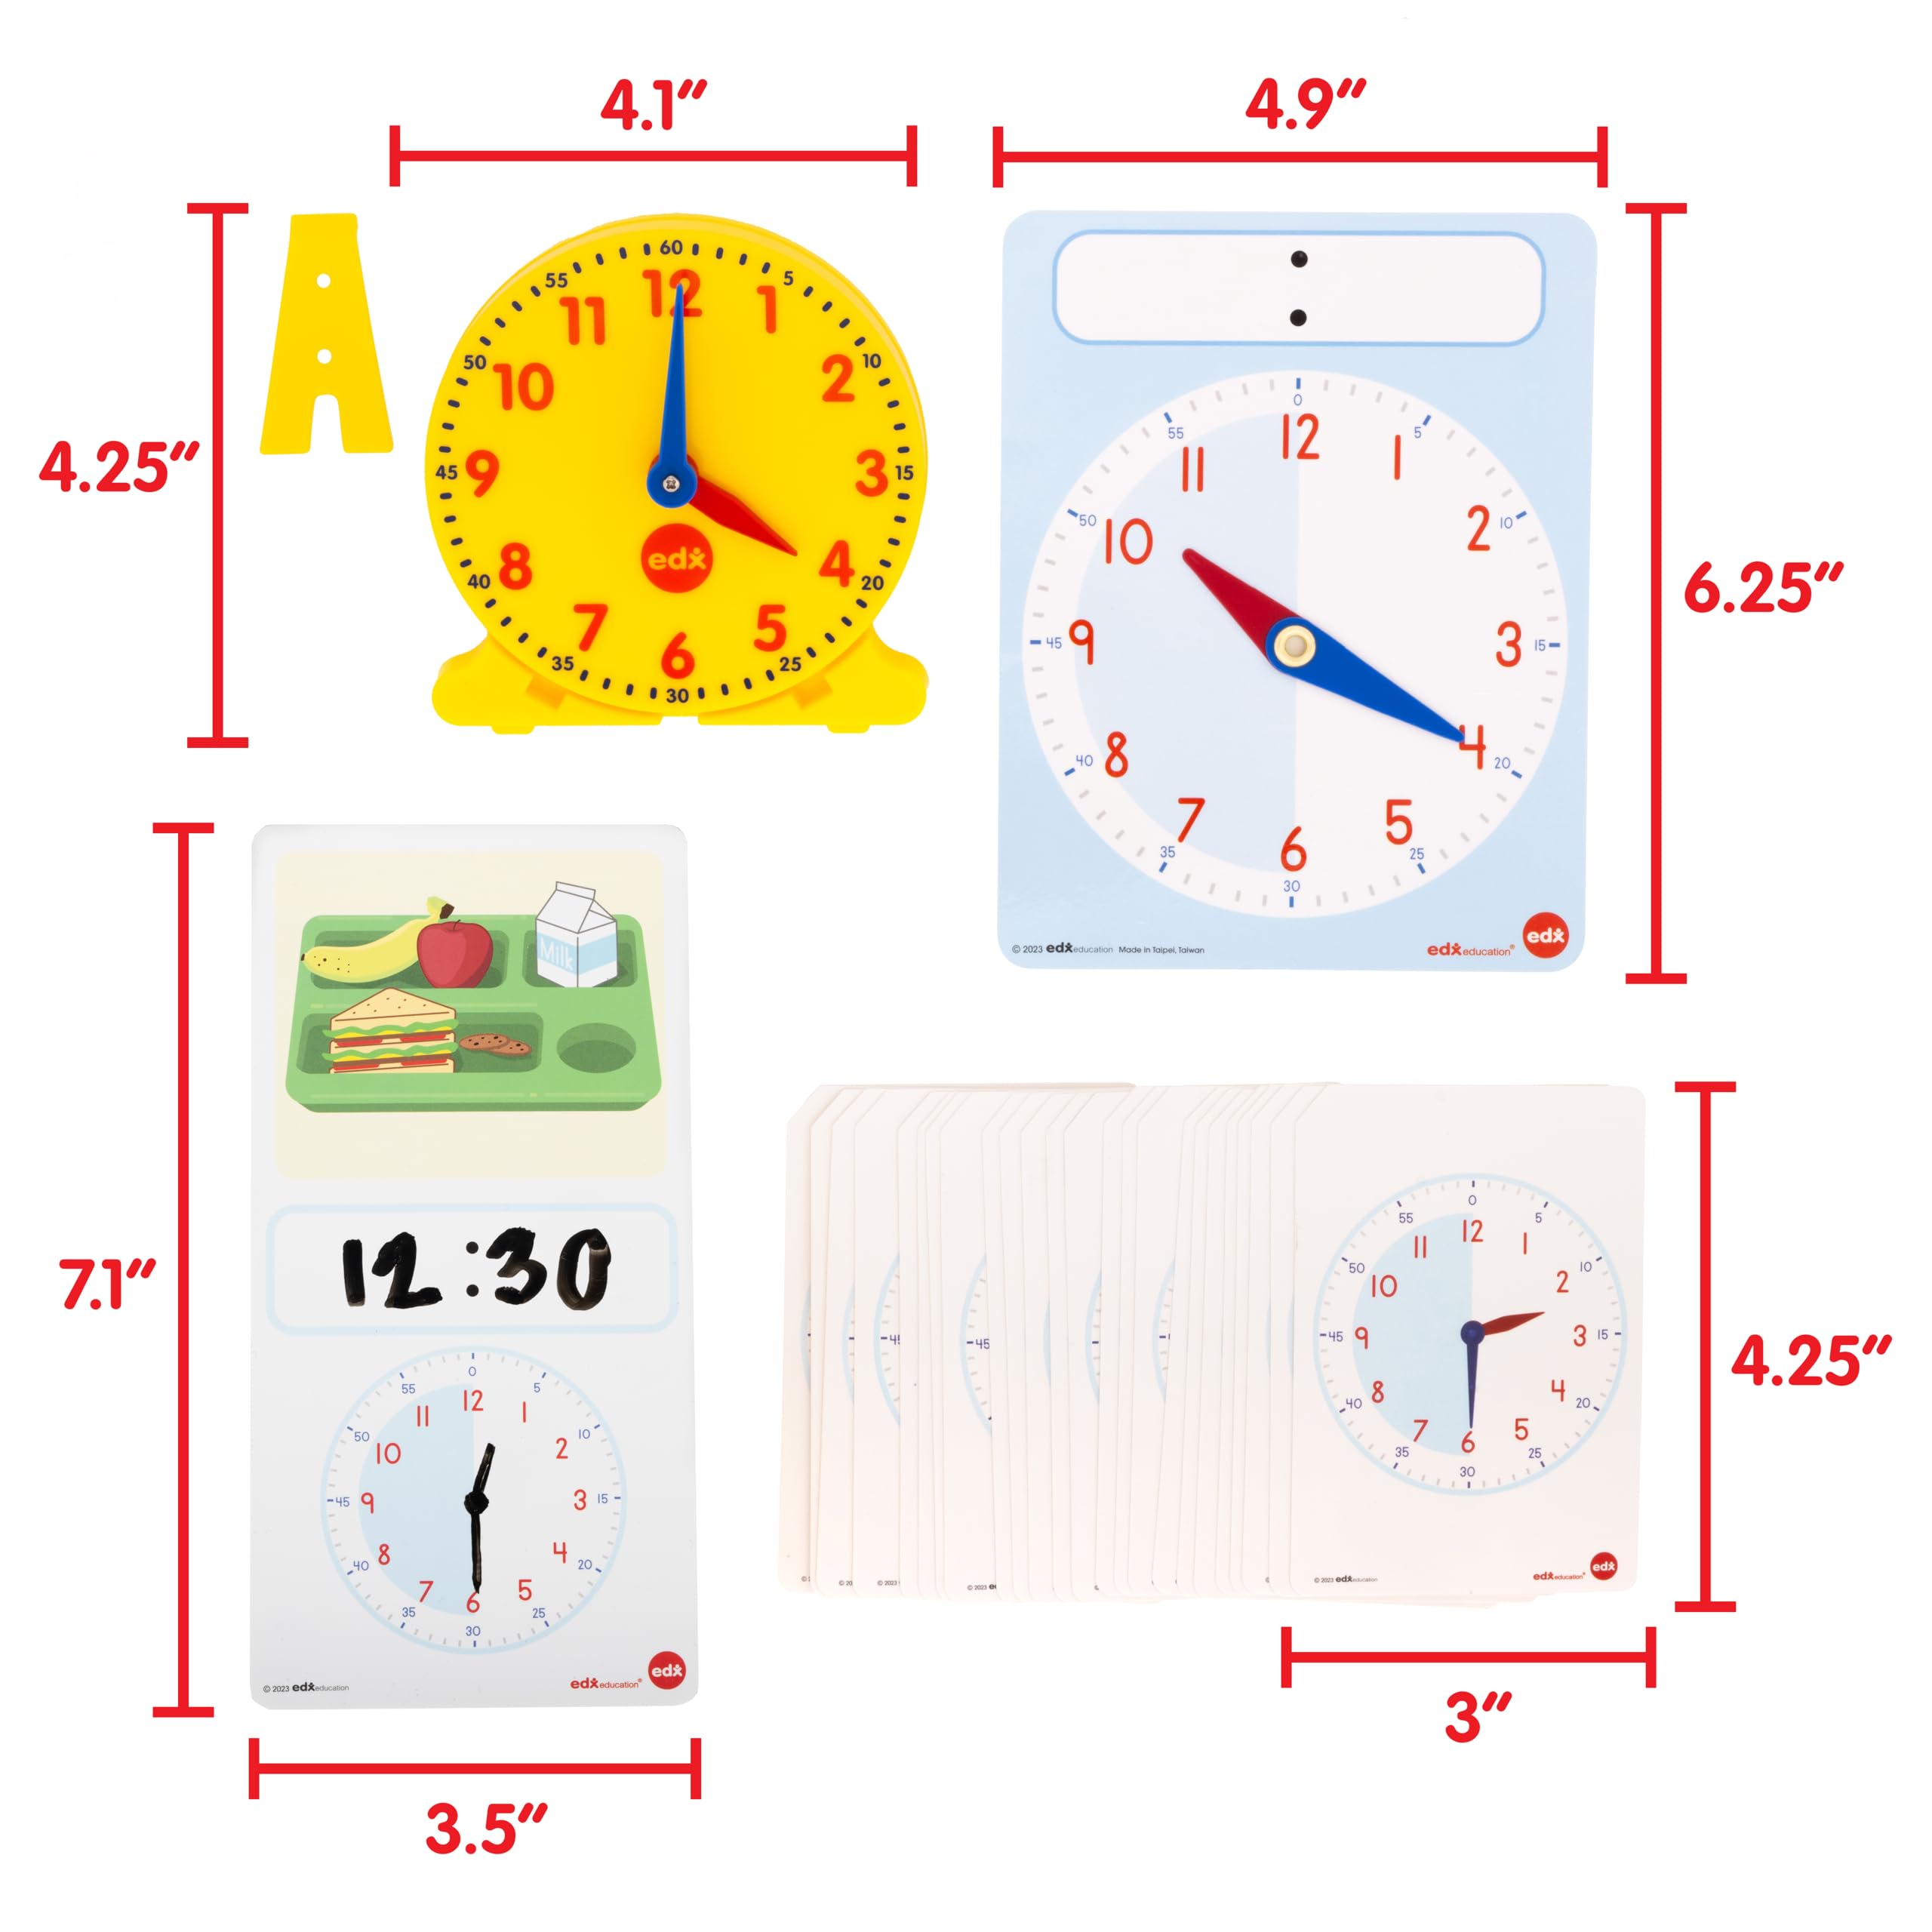 edxeducation Learning Clock Activity Set - 8 Double-Sided Activity Cards and 25 Flashcards - Digital and Analog Teaching Clocks for Kids